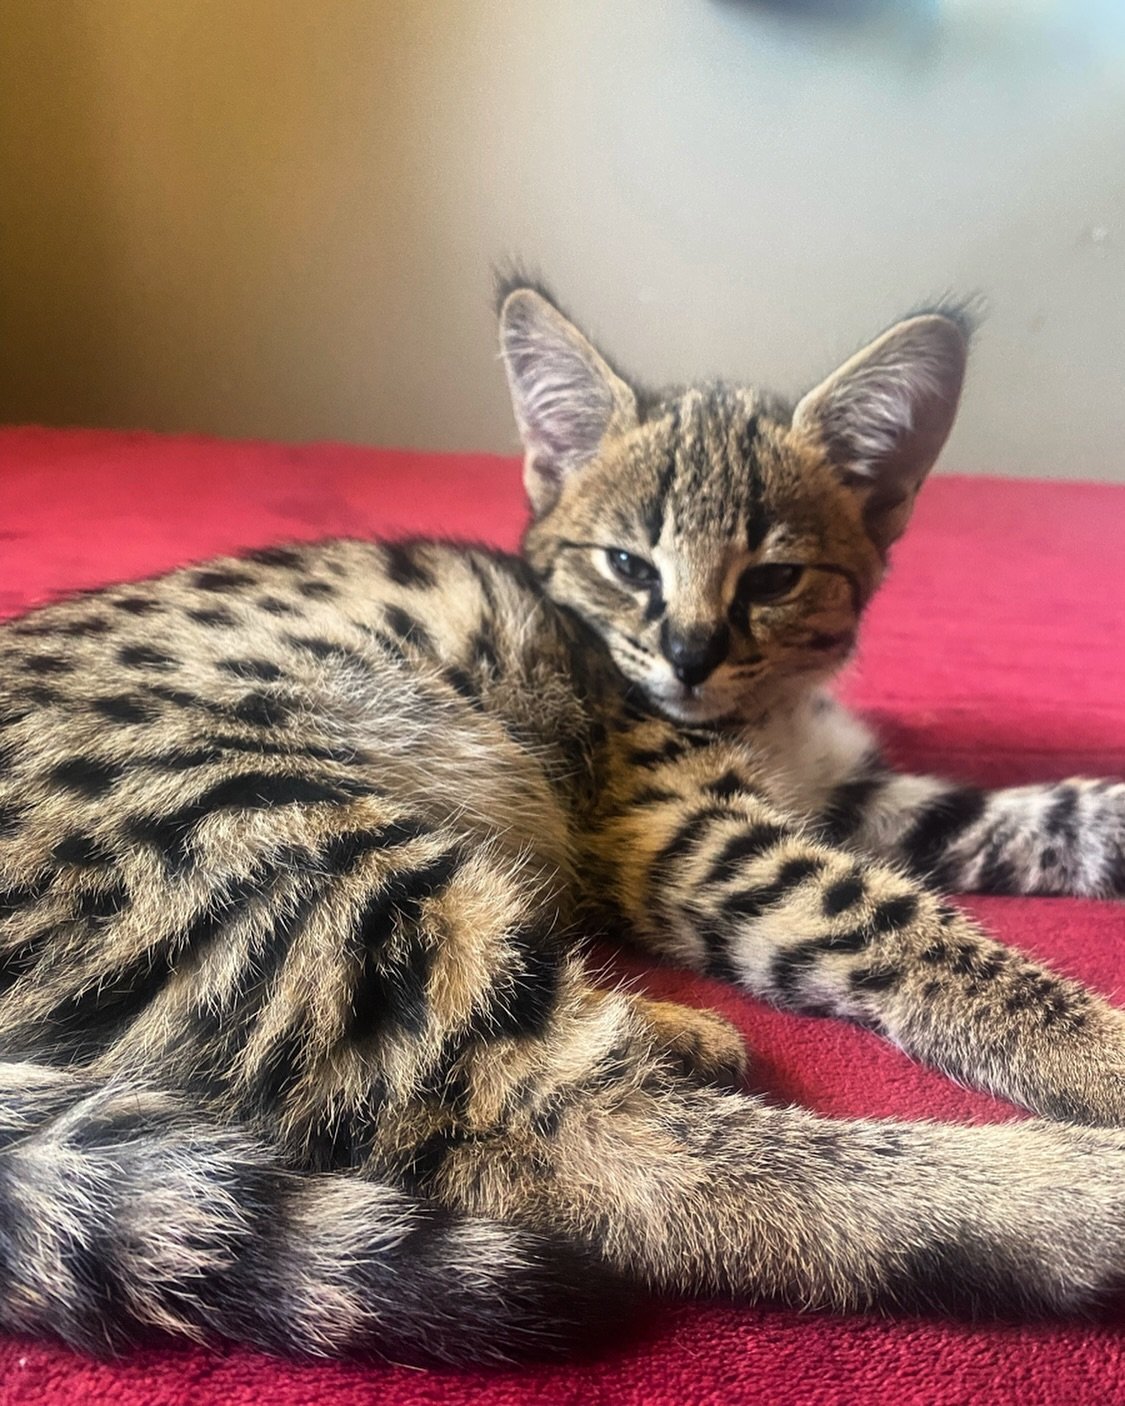 Nova ; our F1 savannah HP kitten ❤️ He is super affectionate and giant at only 9 weeks old! He will be a very very big boy